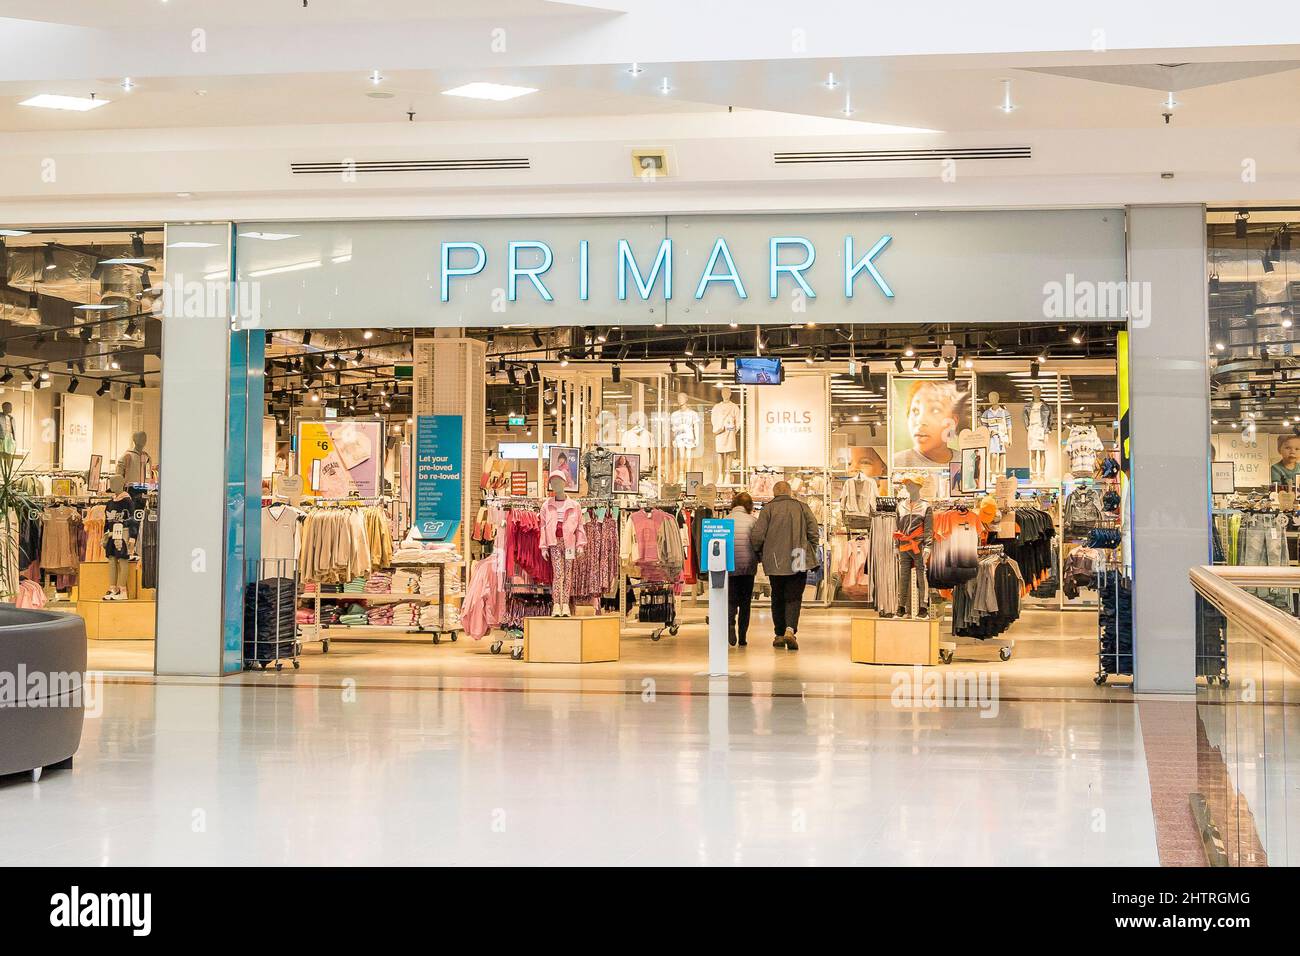 Front entrance of Primark clothing store inside Merry Hill Shopping Centre in the Midlands, UK. Retailers of low cost 'Fast Fashion' clothing. Stock Photo